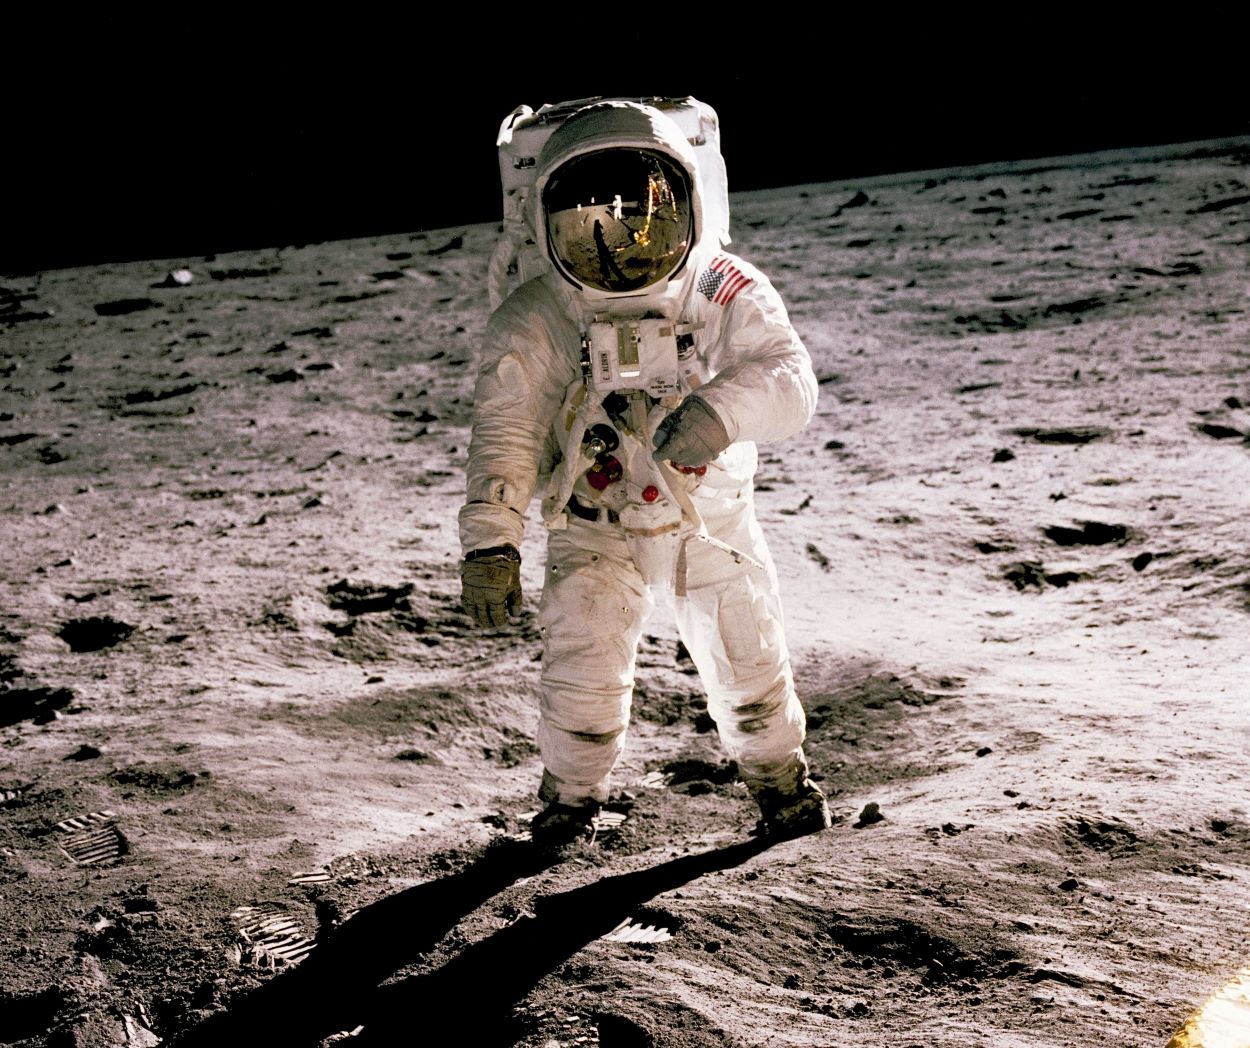 The first-ever human walking on the surface of the moon